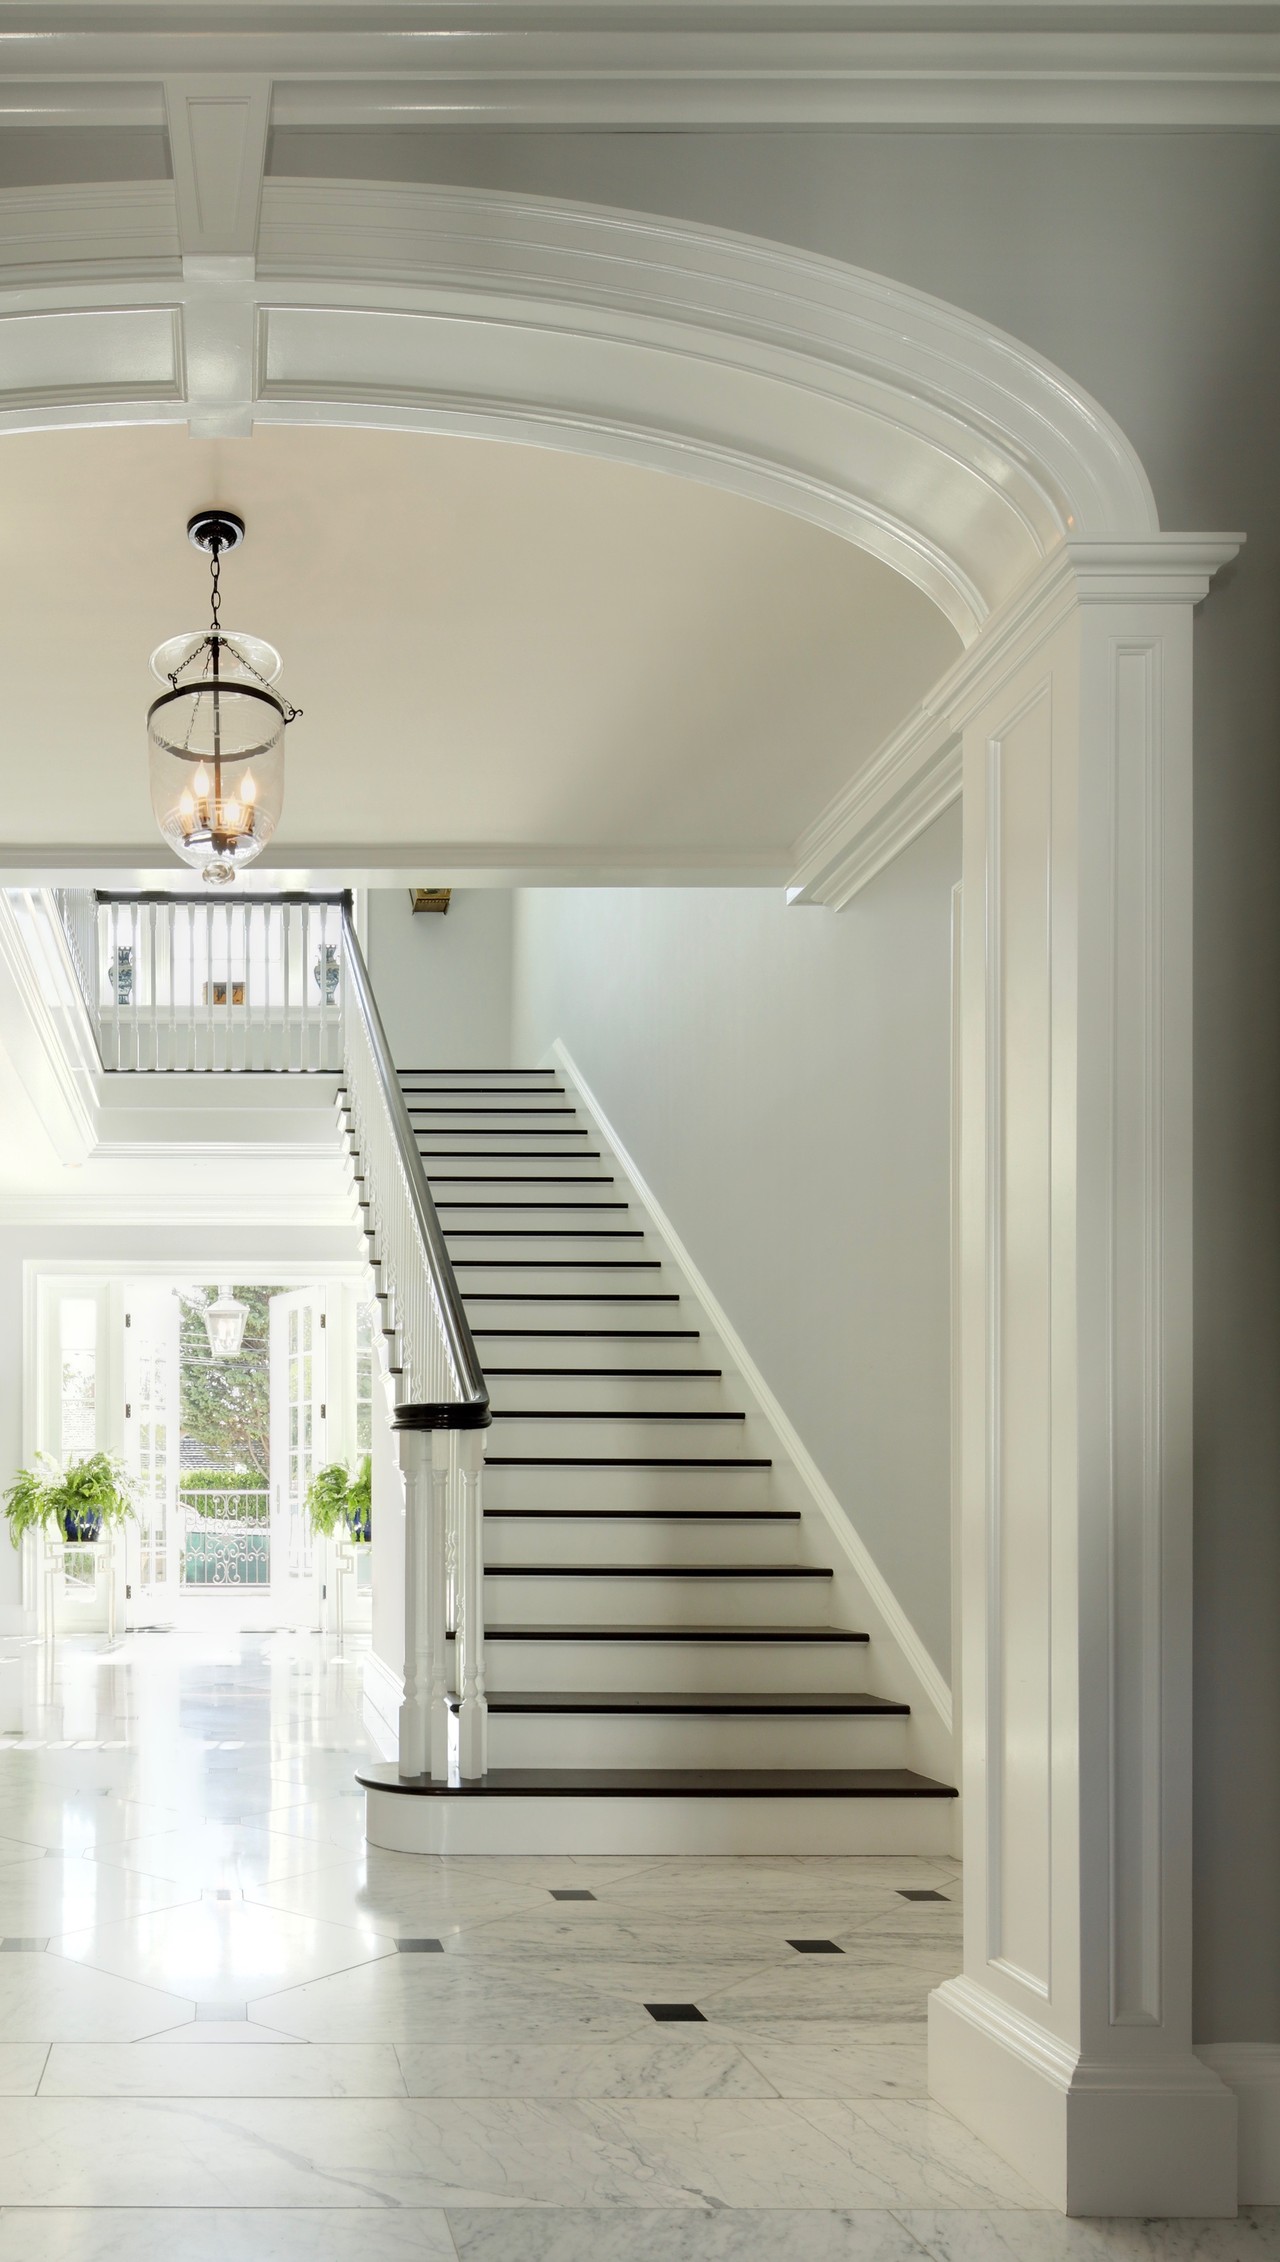 Brentwood stair hall with white marble floor with black cabochons